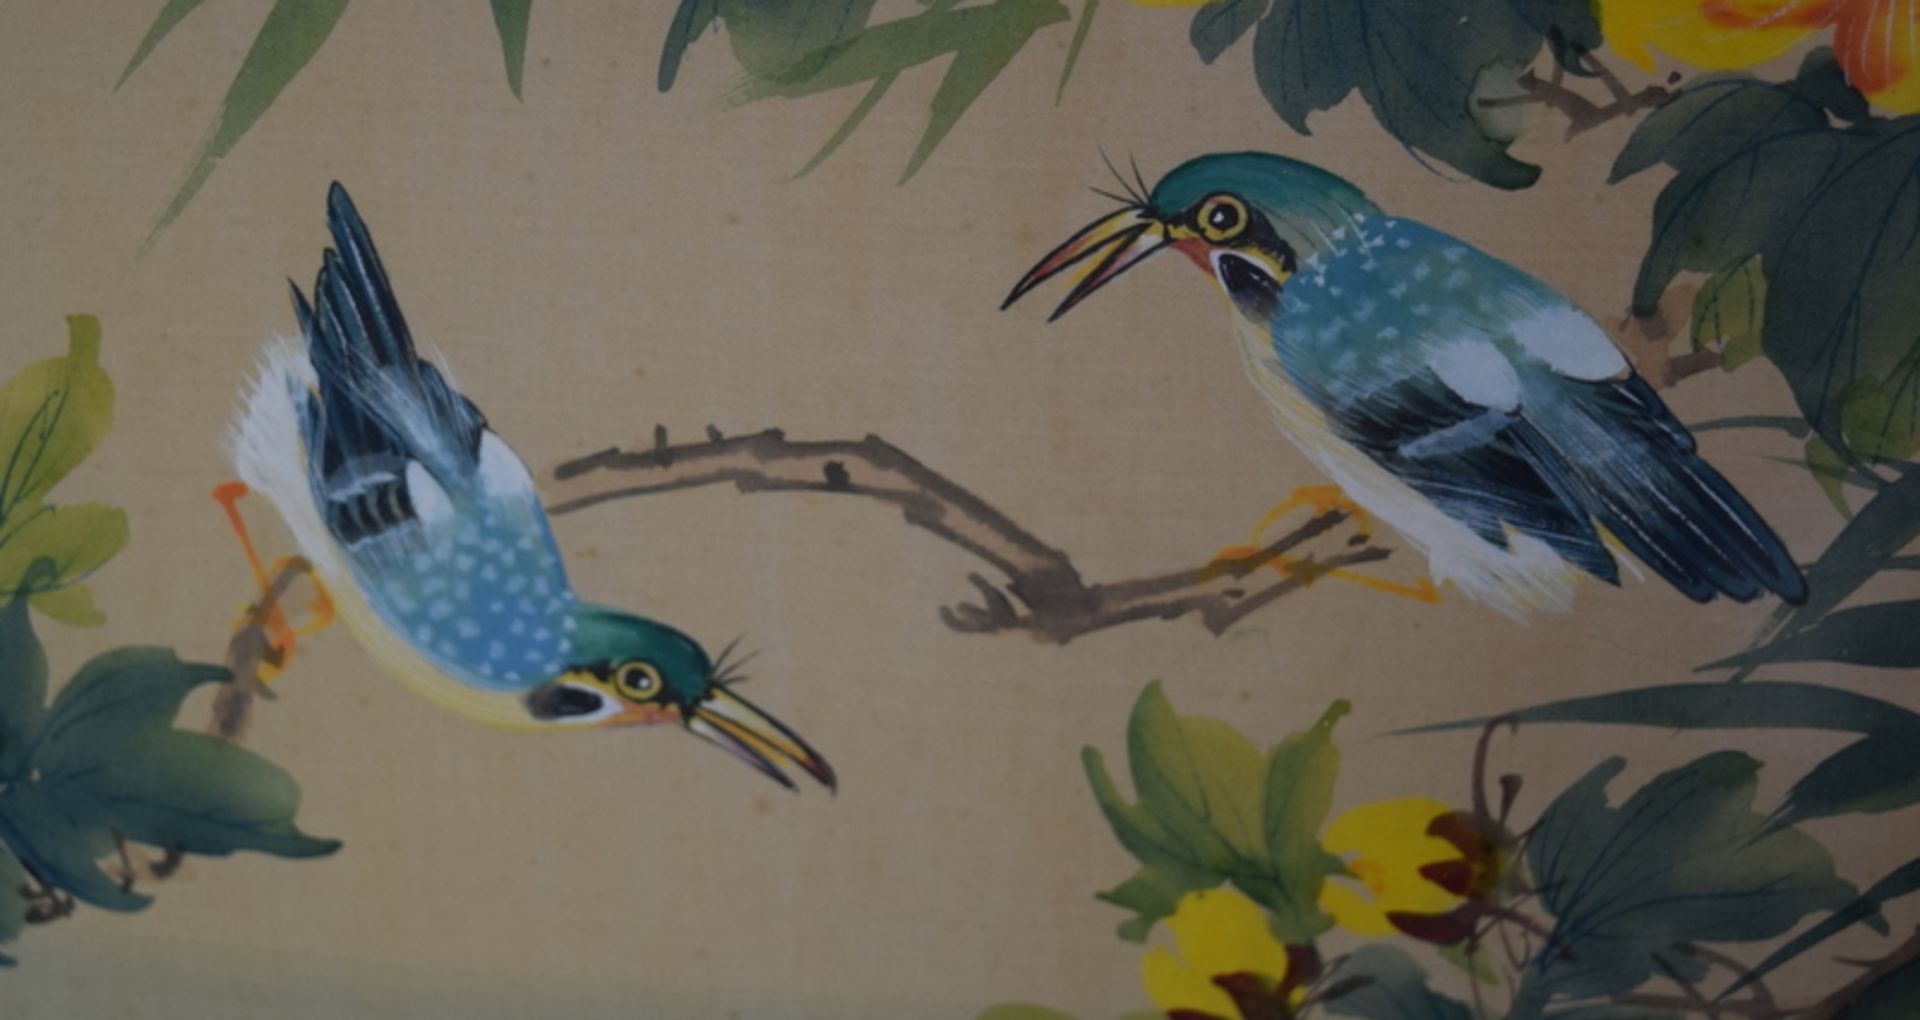 Framed Chinese Painting Of Two Bluebirds - Image 2 of 2